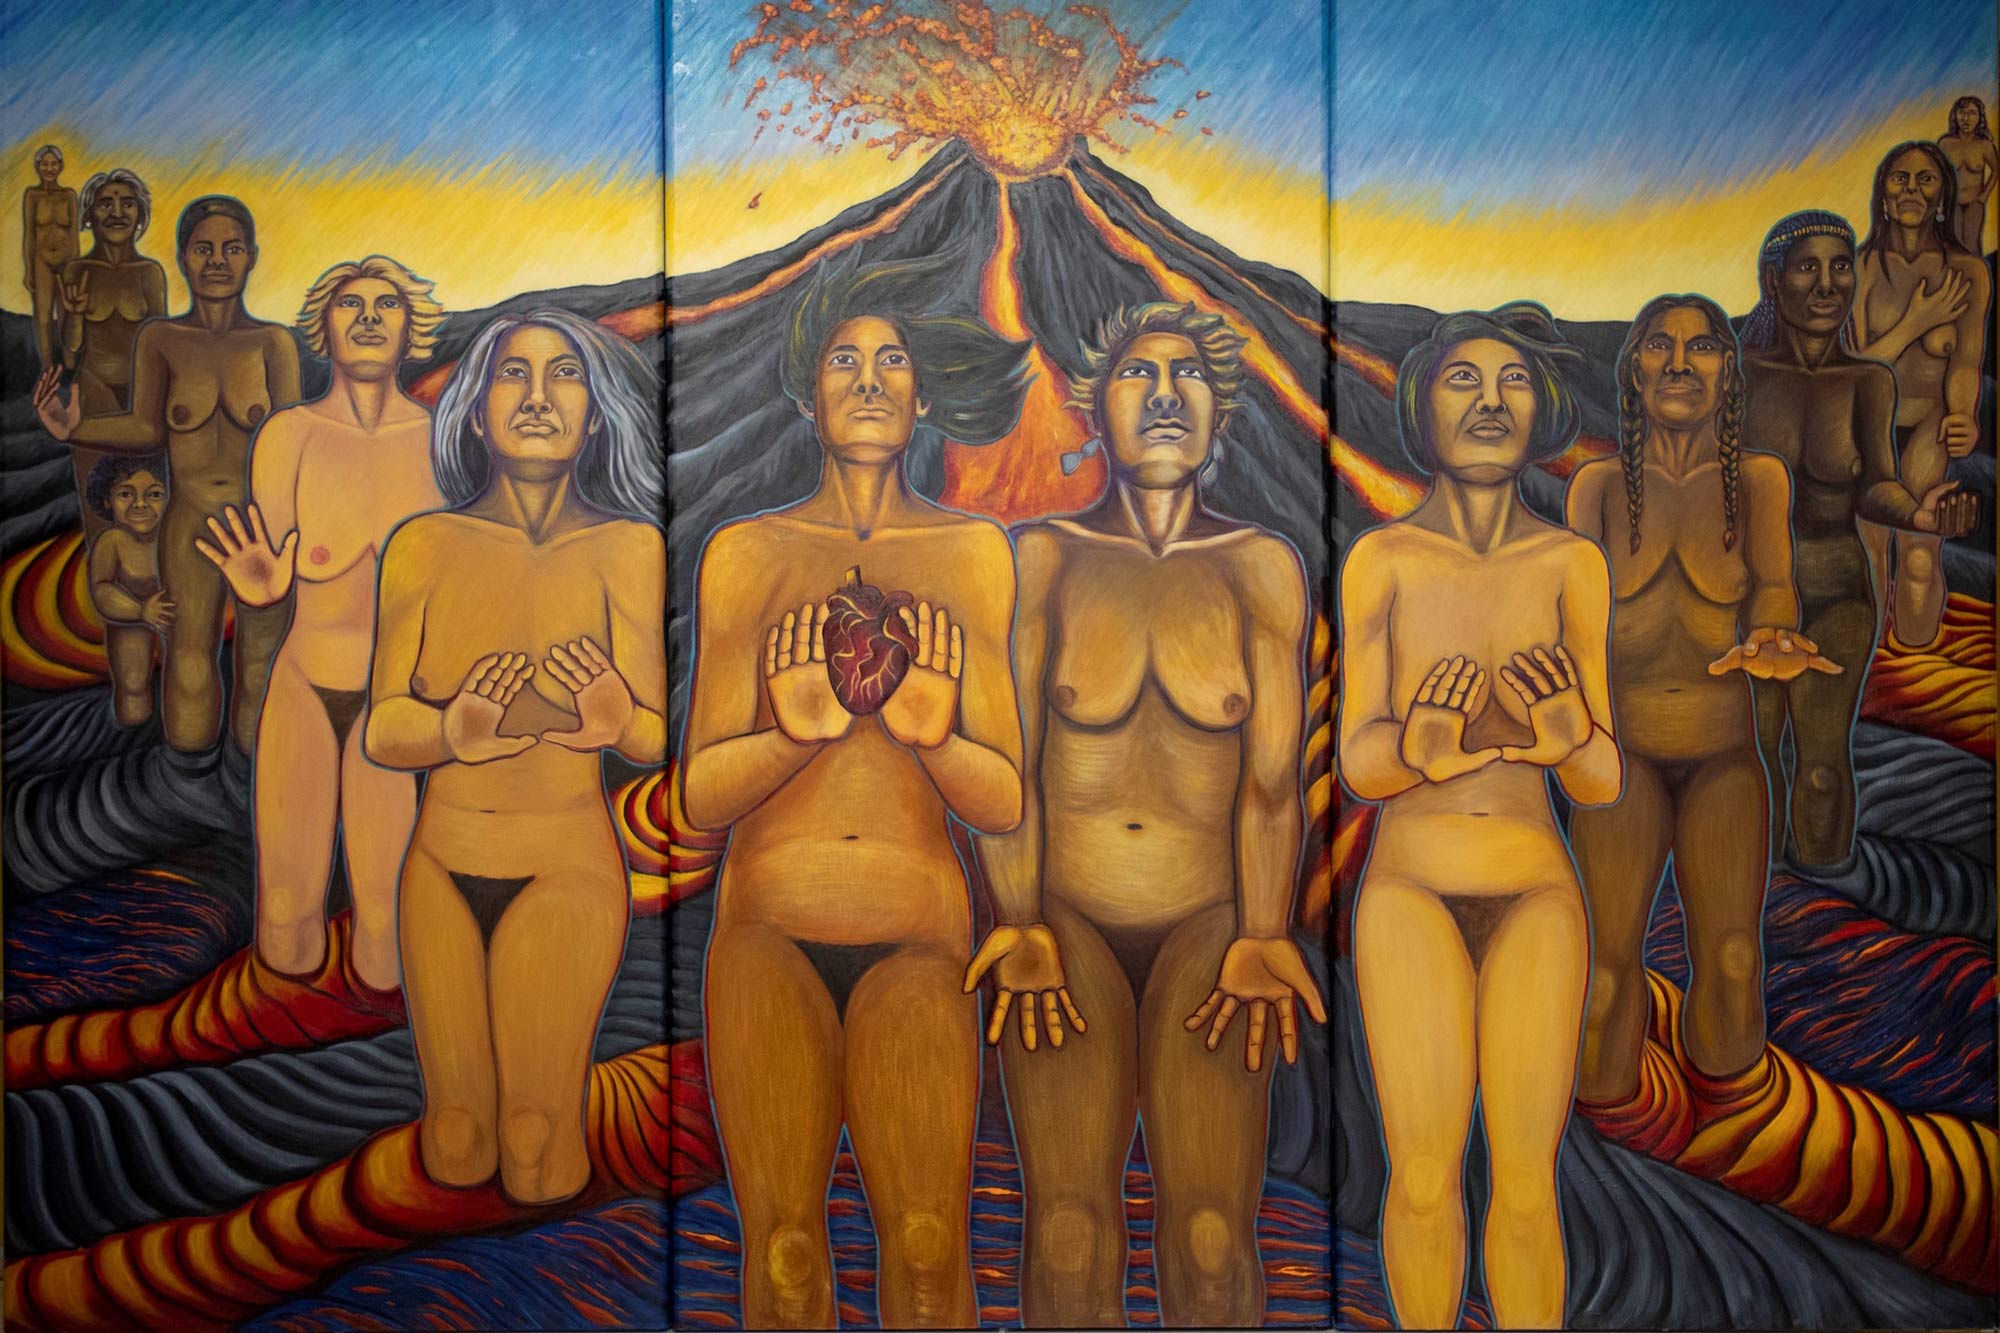 The Matriarchal Mural: When God was Woman (1980-2021)